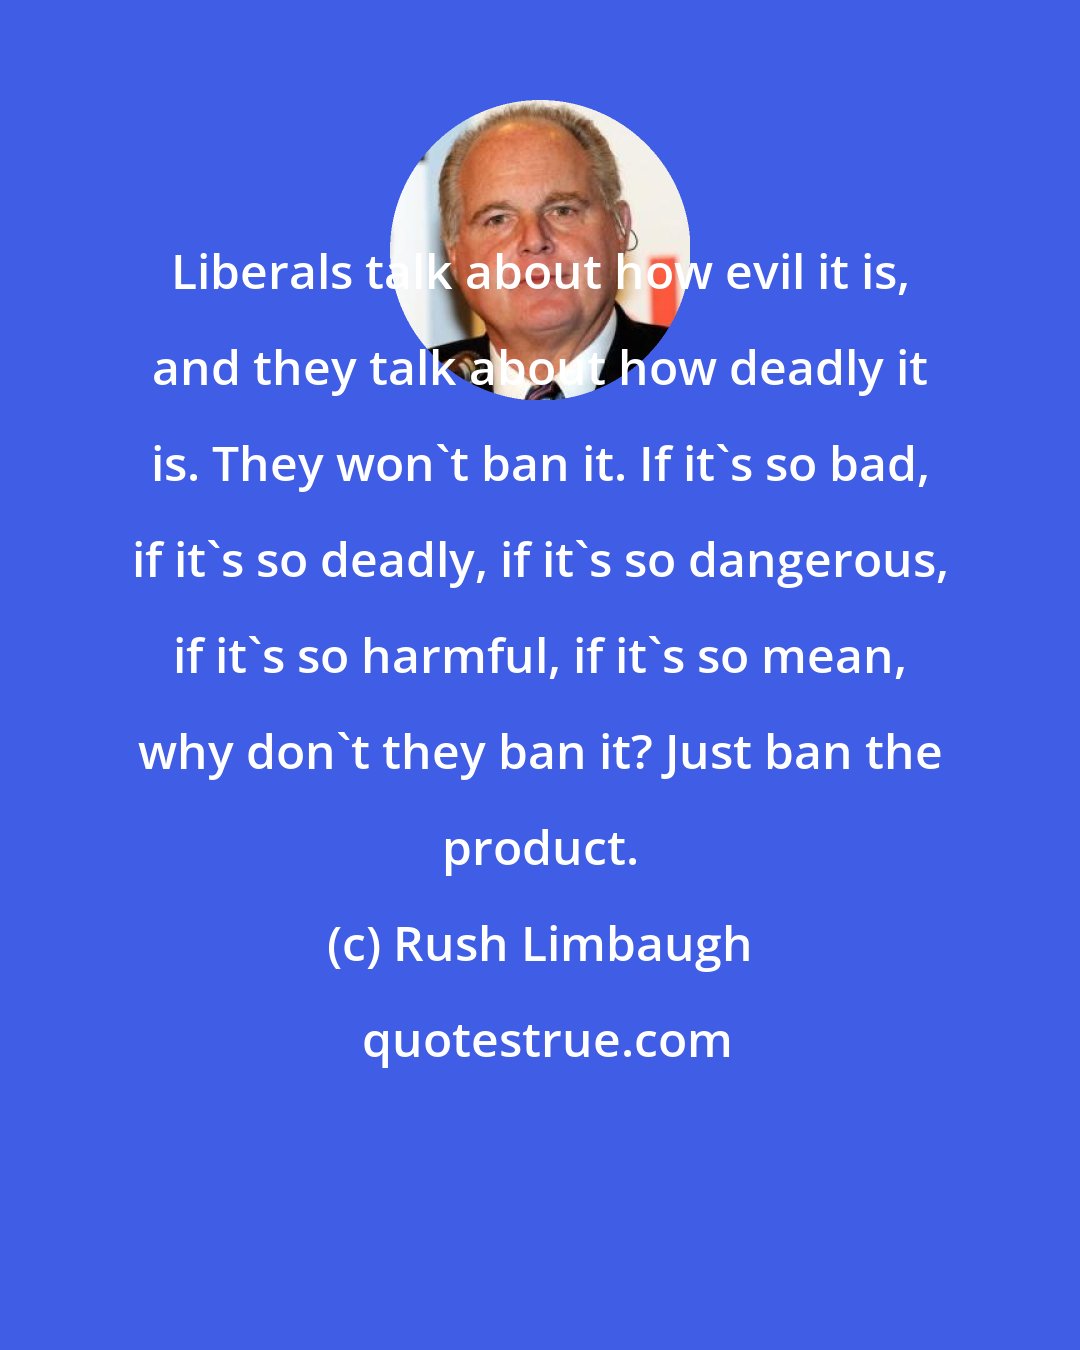 Rush Limbaugh: Liberals talk about how evil it is, and they talk about how deadly it is. They won't ban it. If it's so bad, if it's so deadly, if it's so dangerous, if it's so harmful, if it's so mean, why don't they ban it? Just ban the product.